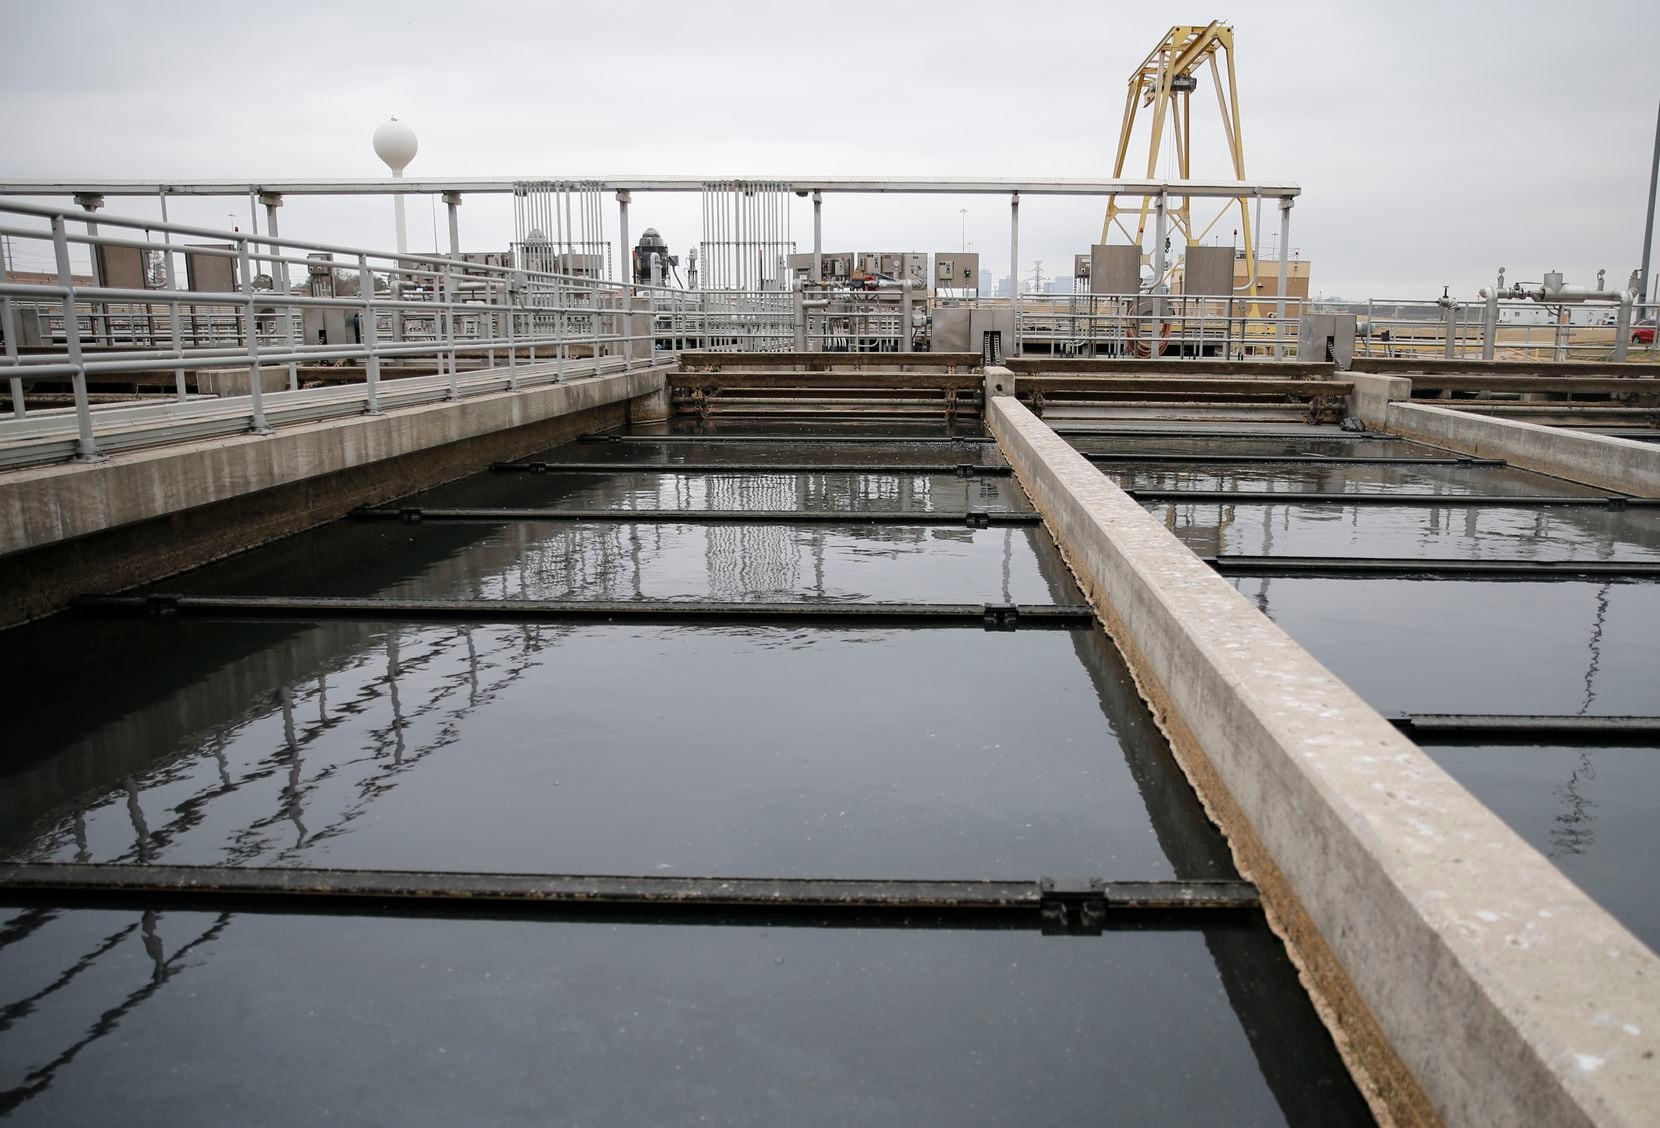 Samples are collected at the Central Wastewater Treatment Plant in east Oak Cliff to test...